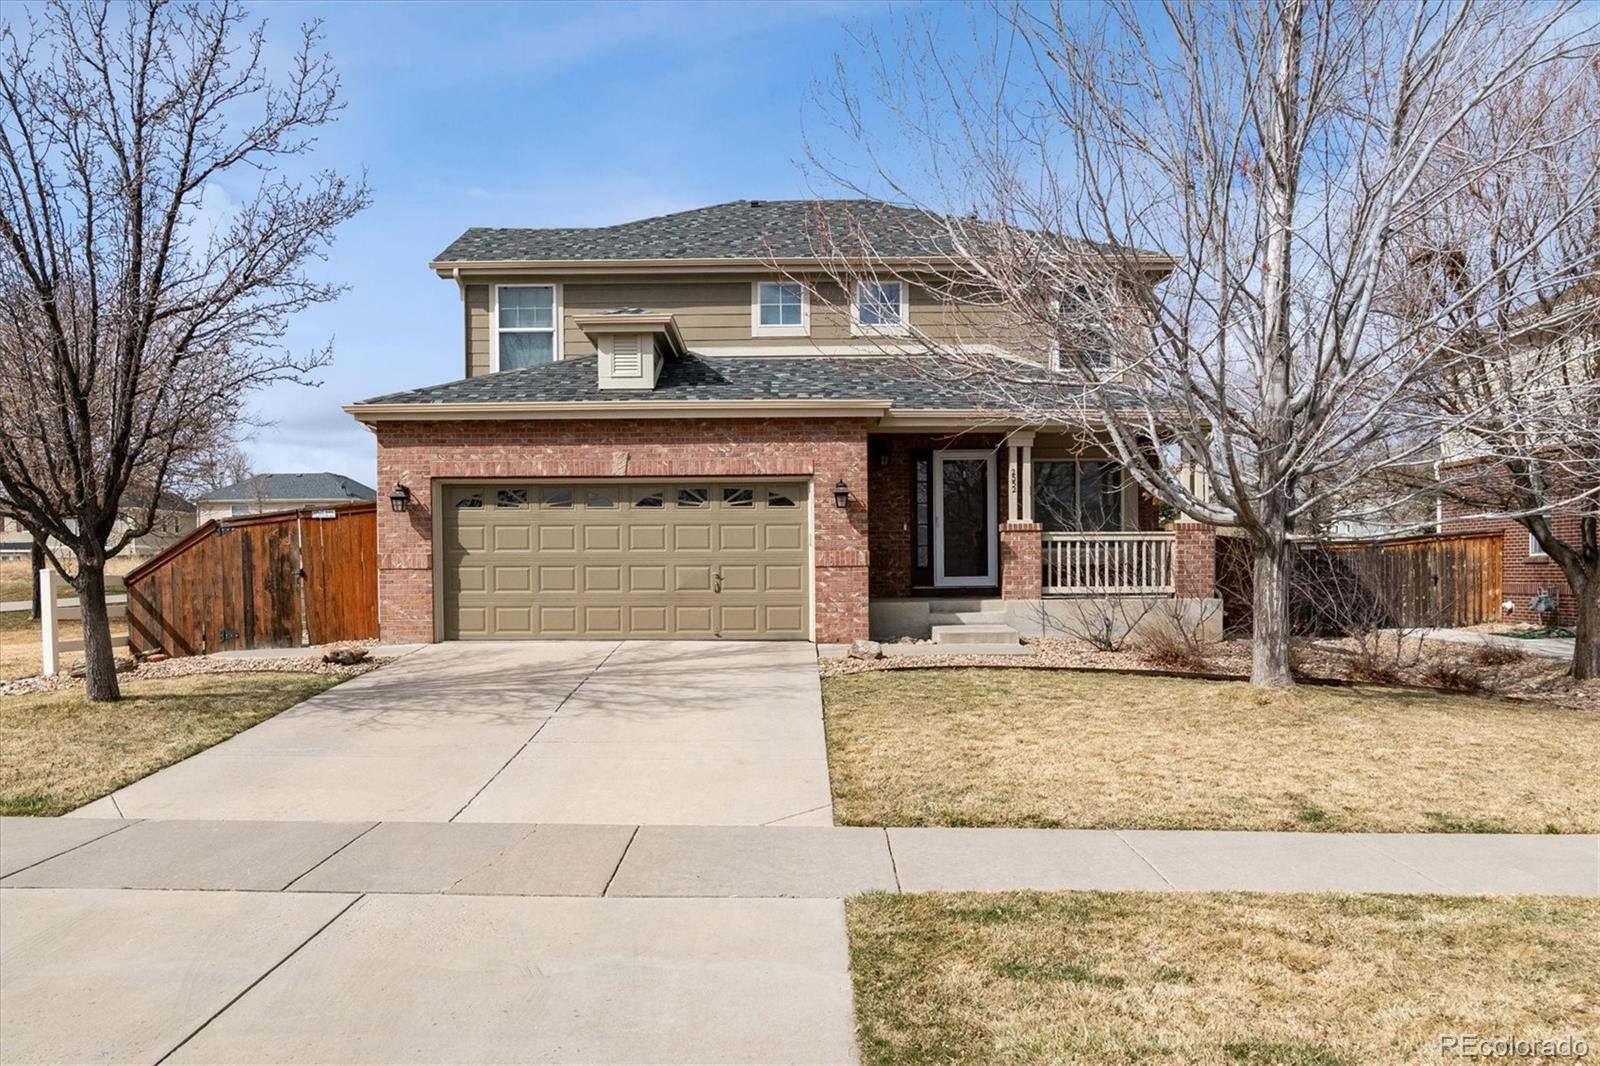 2525 s jebel way, Aurora sold home. Closed on 2024-04-19 for $559,900.